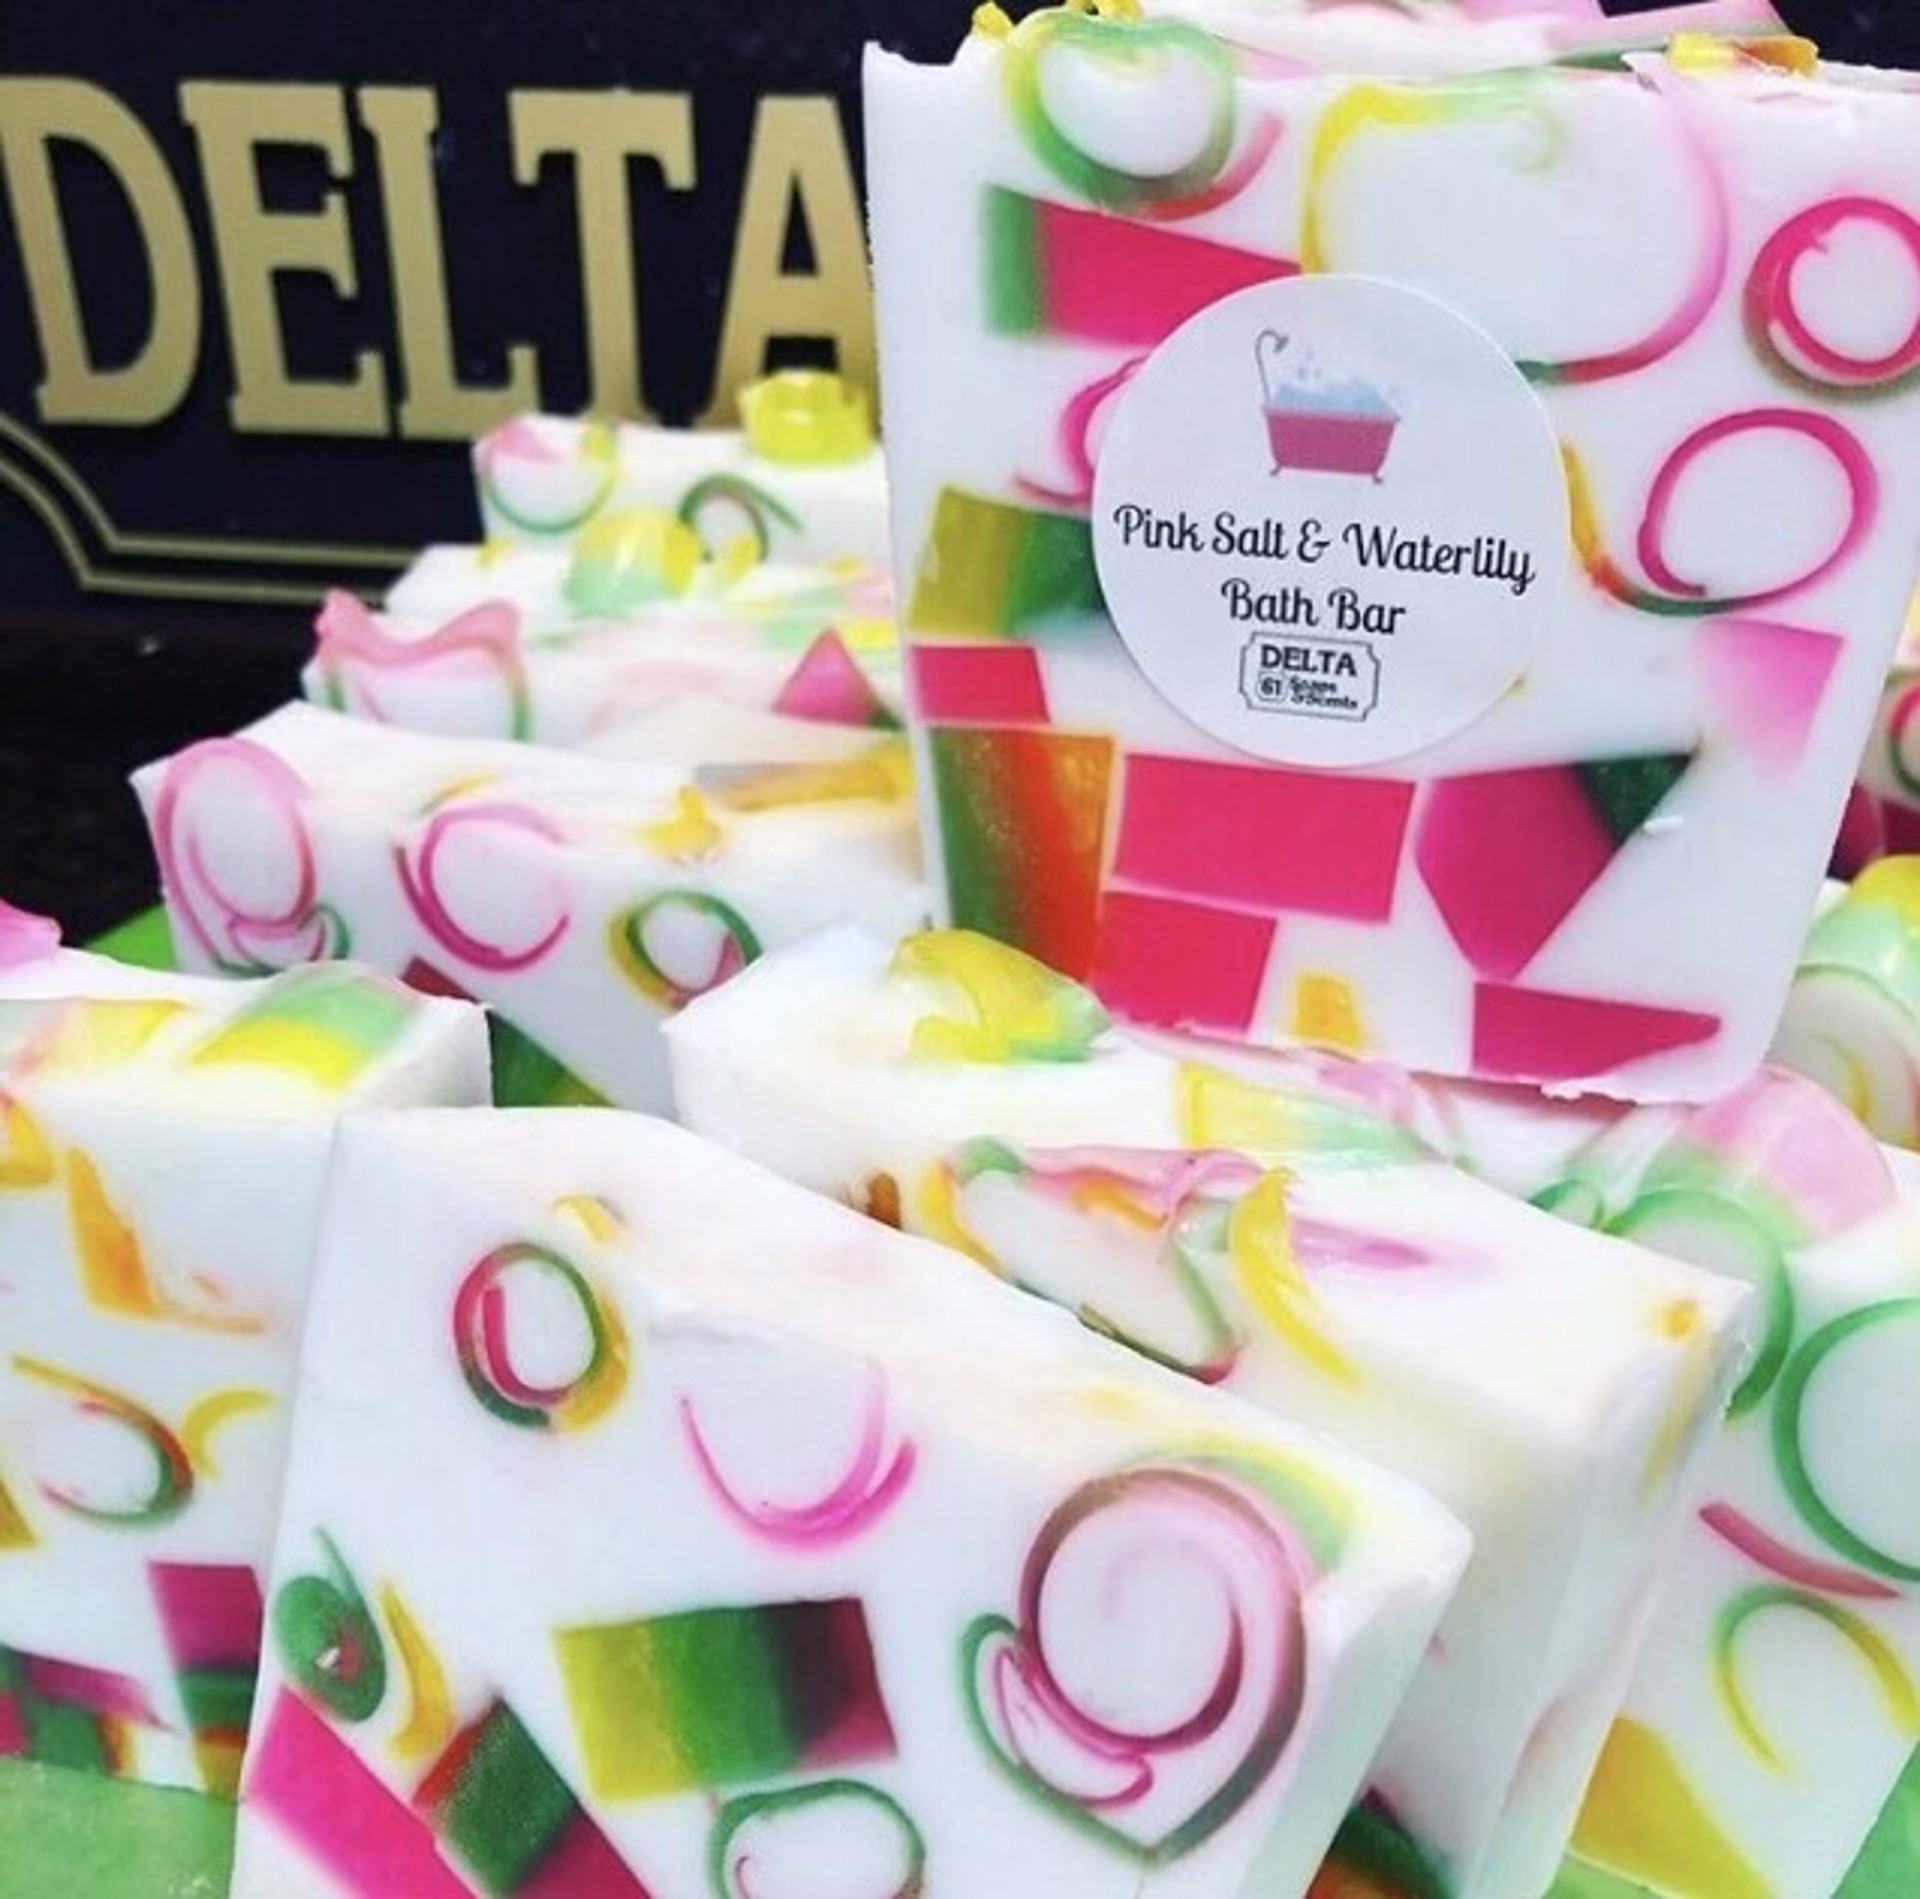 Pink Salt & Waterlily Soap by Delta Soaps and Scents